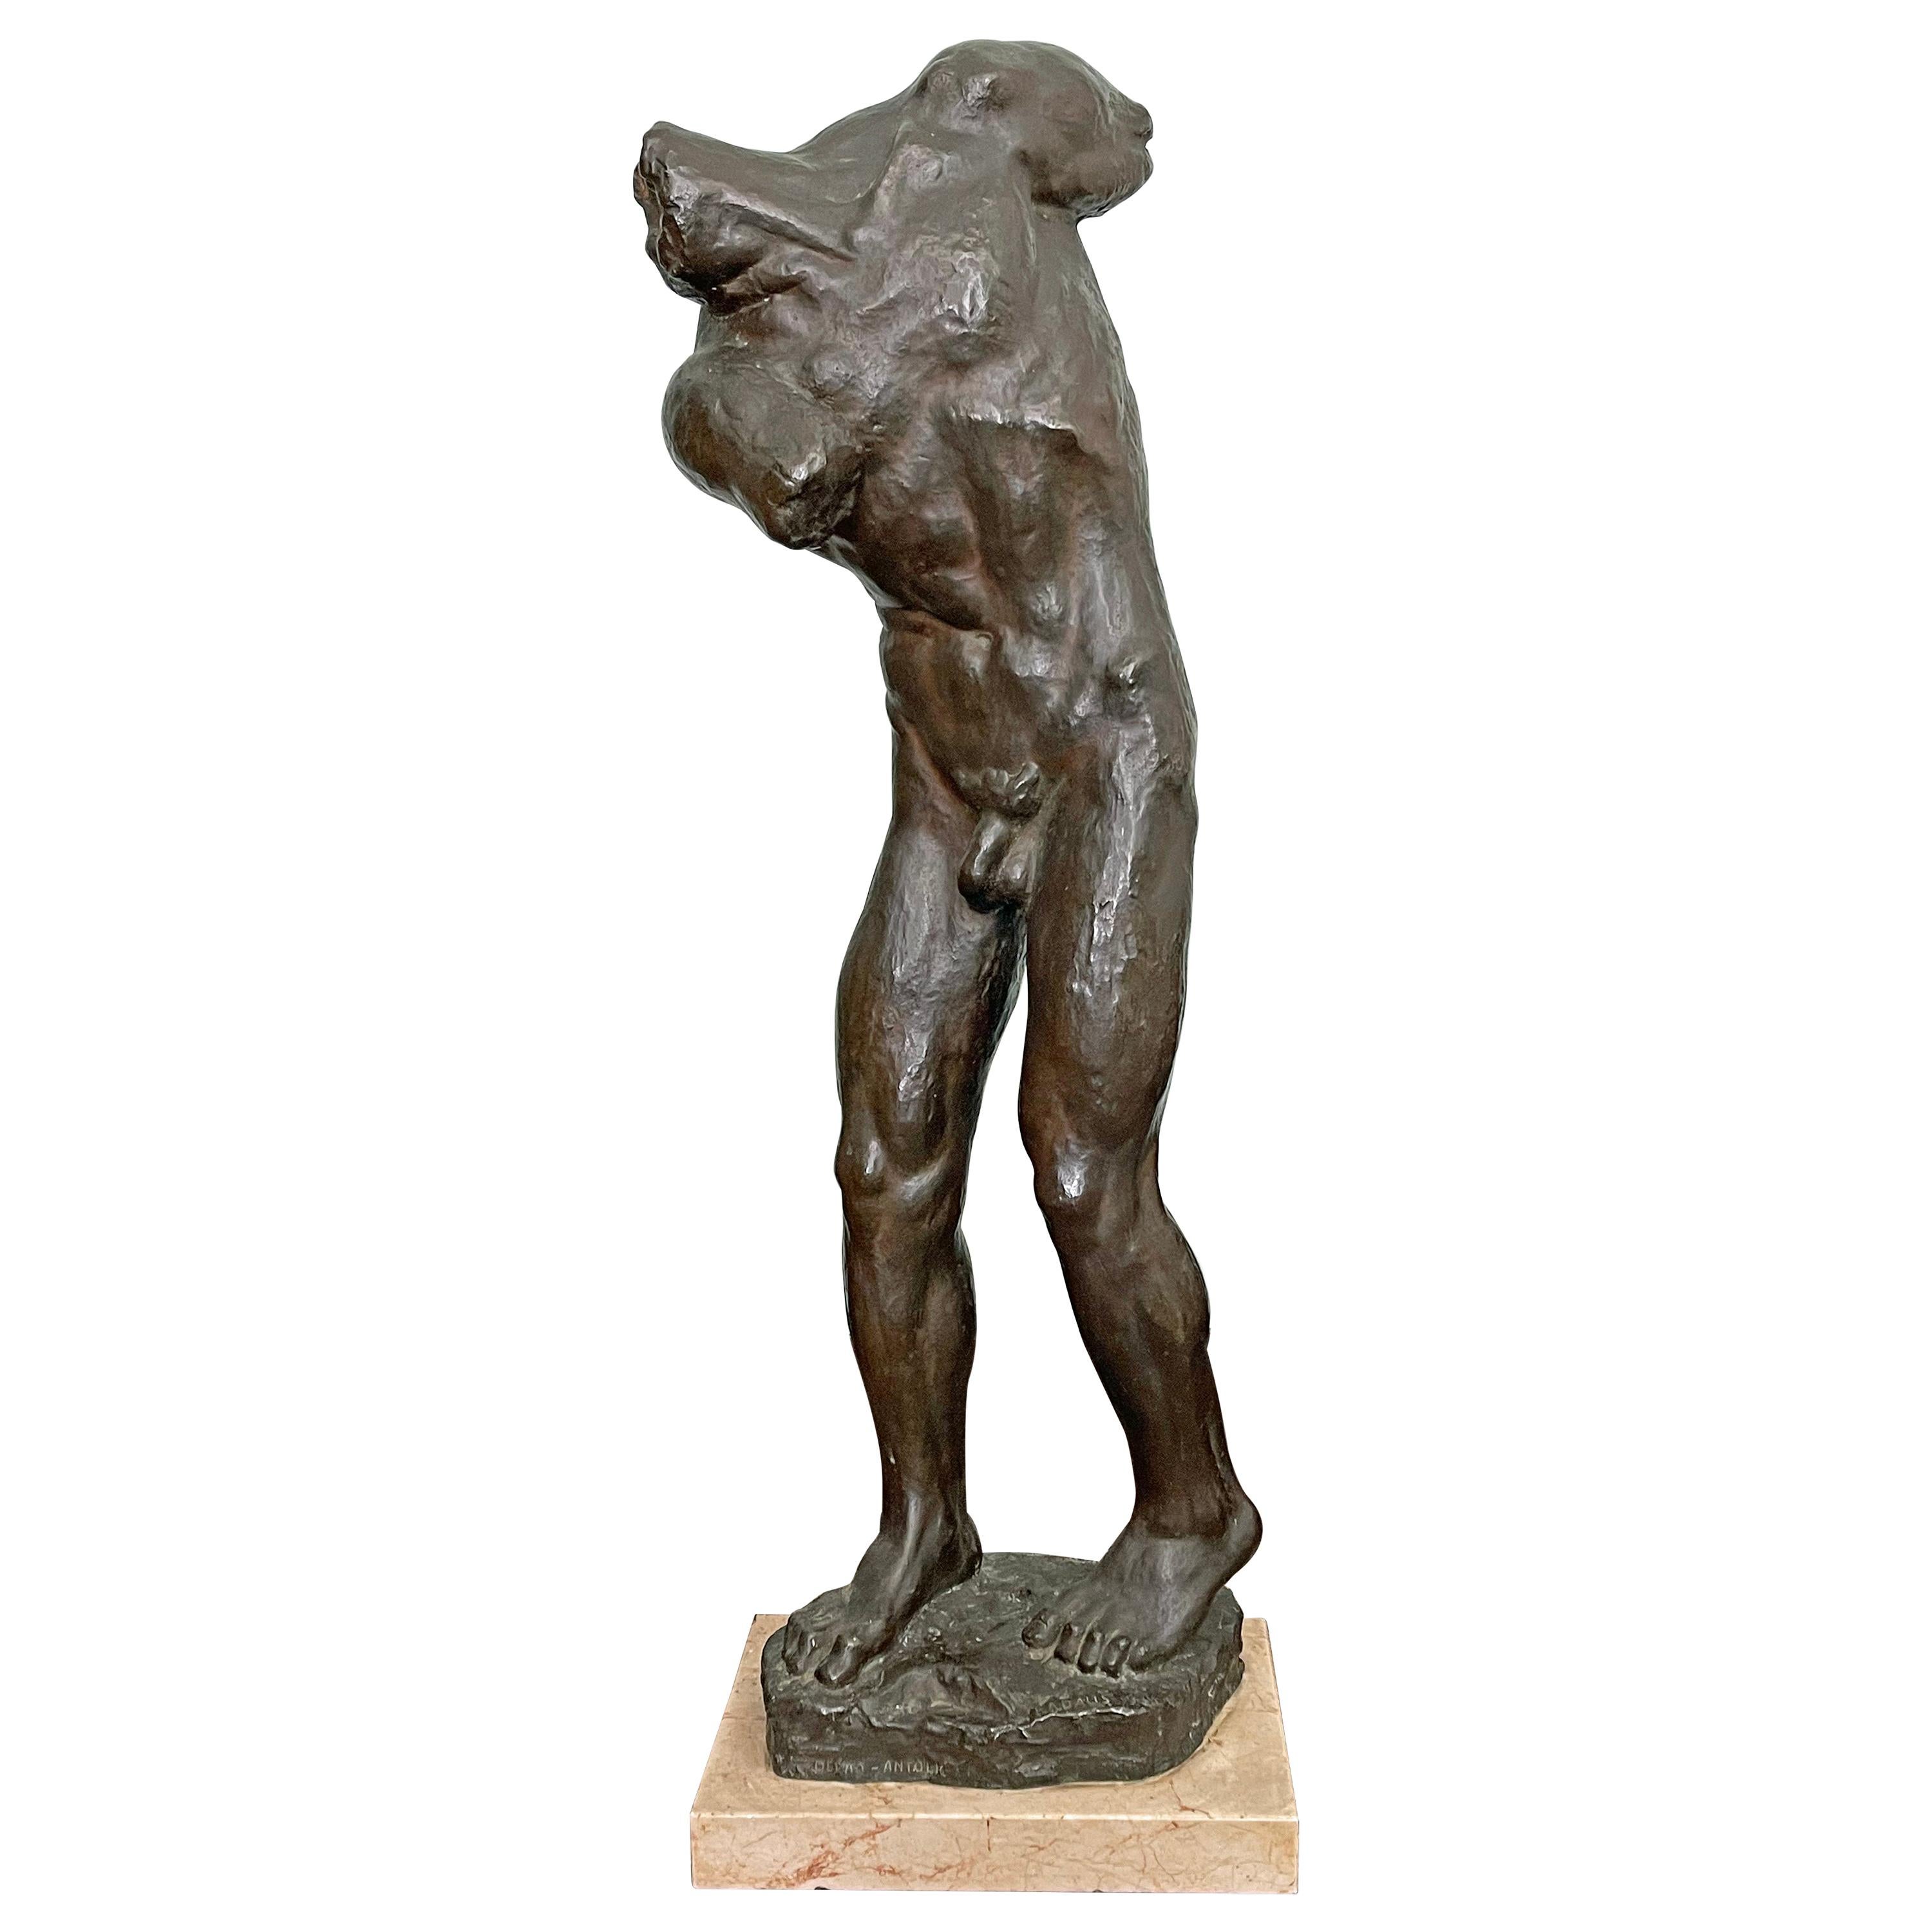 "The Reaper," Large, Spectacular Male Nude Bronze Sculpture by Radauš, 1934